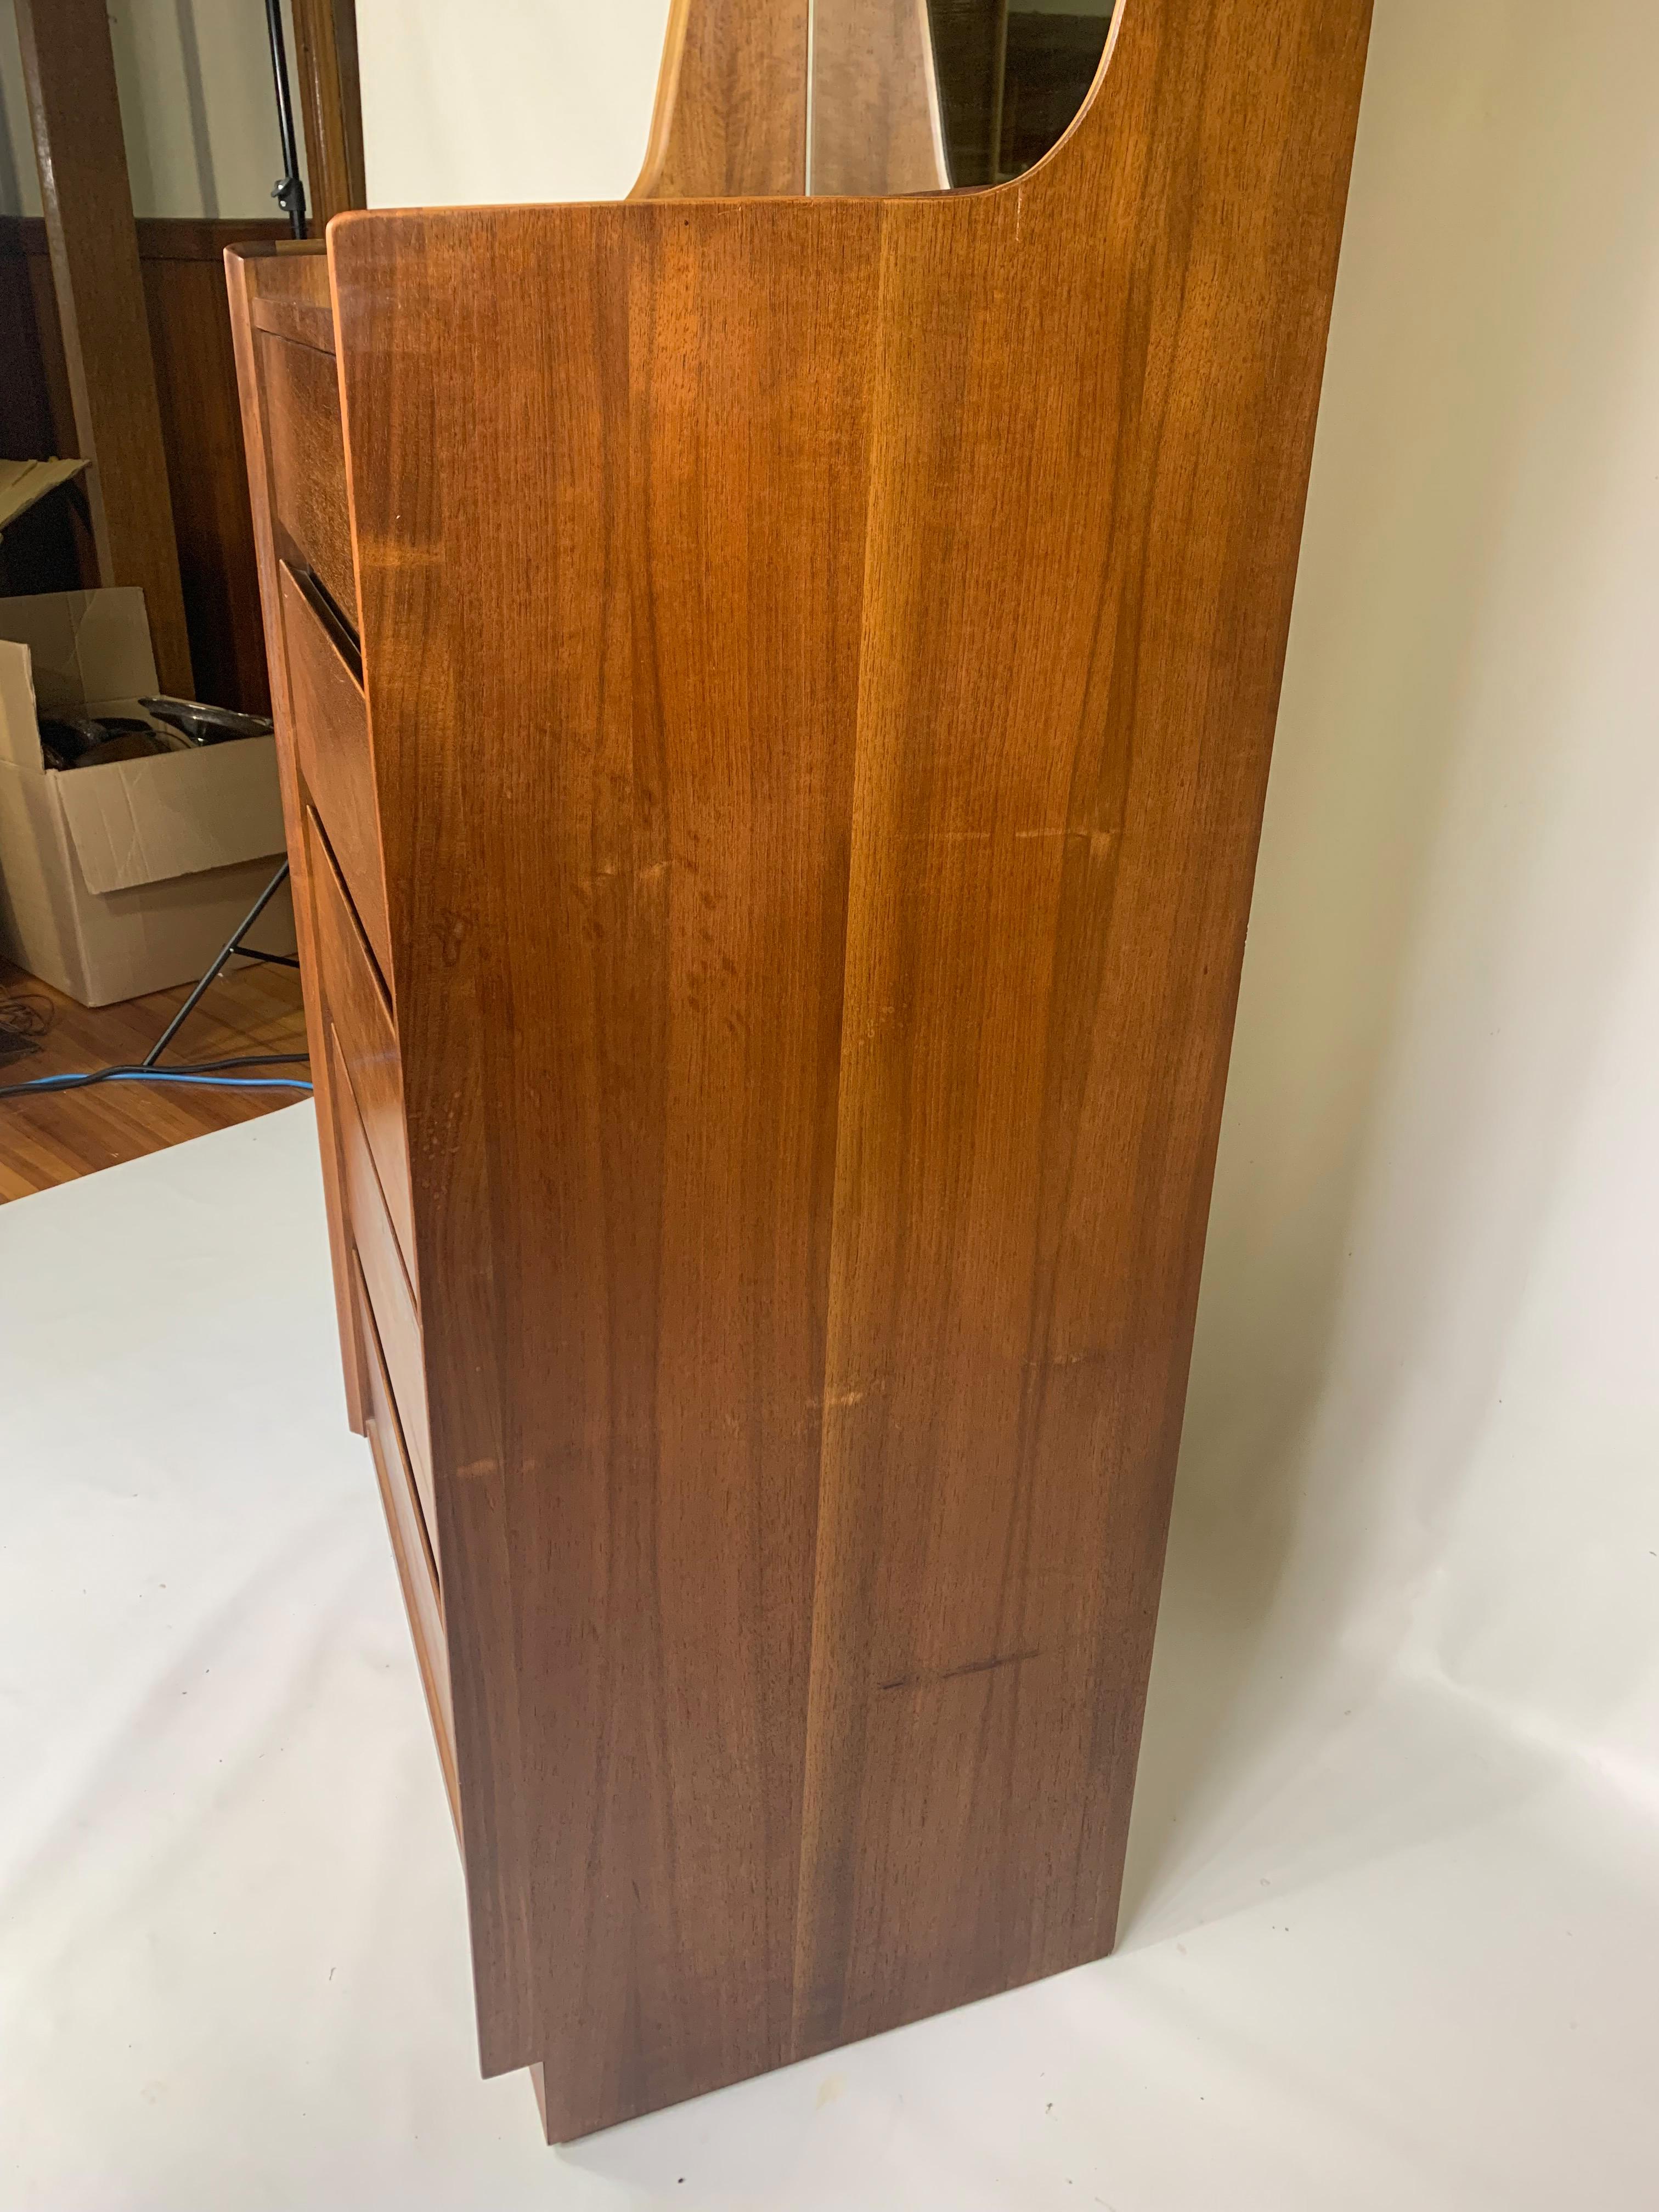 Dillingham Esprit walnut tall chest with attached mirror

Walnut tall chest with connected mirror and built in 